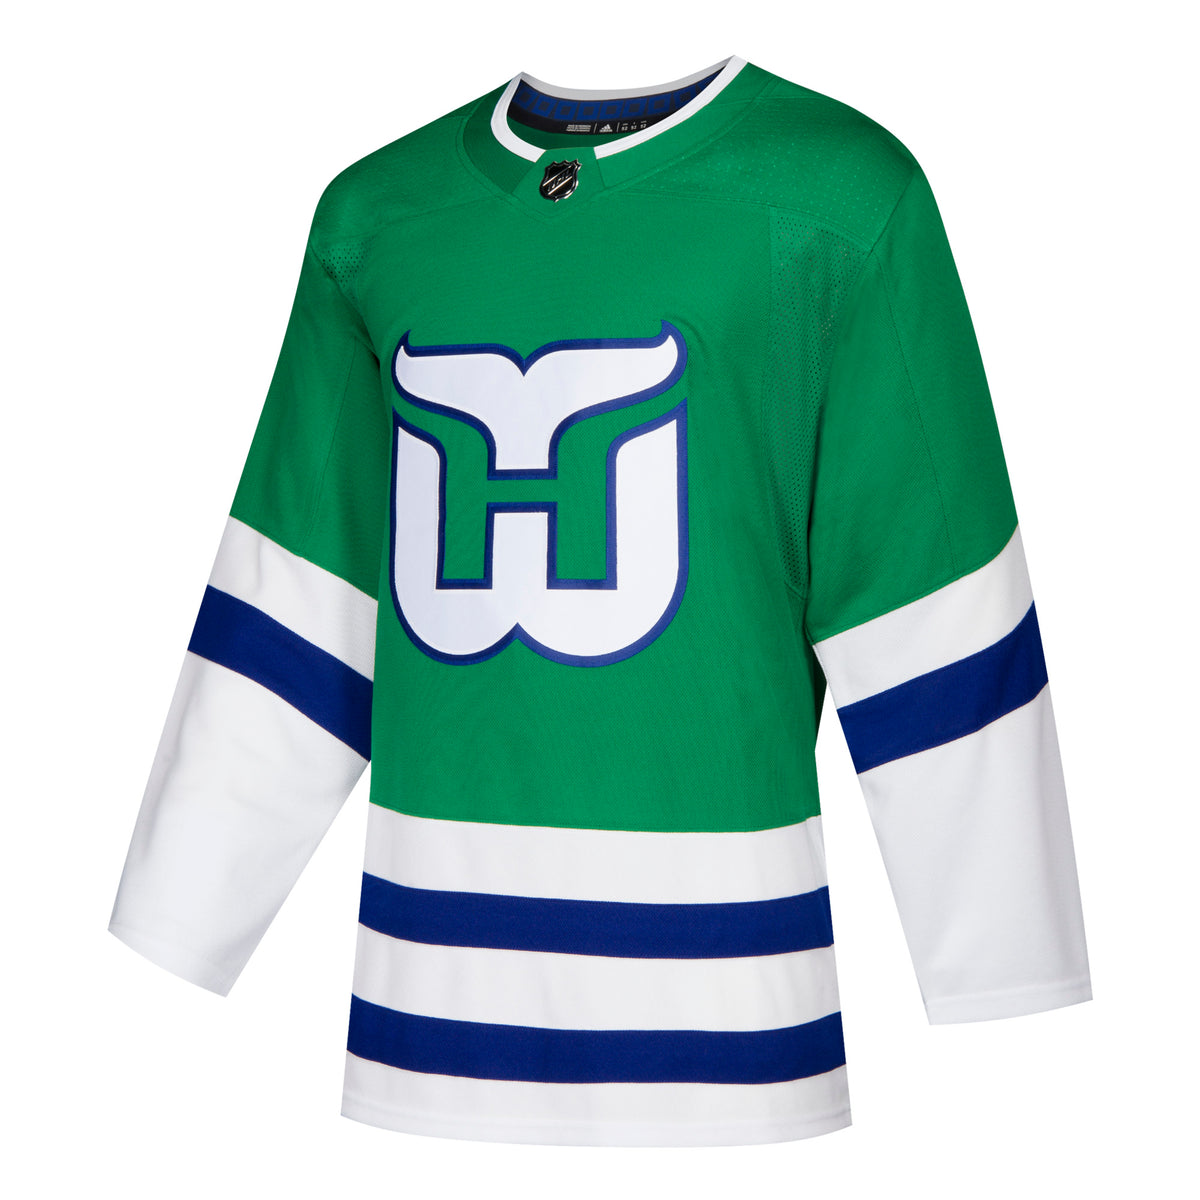 Adidas Authentic Pro Whaler Jersey 